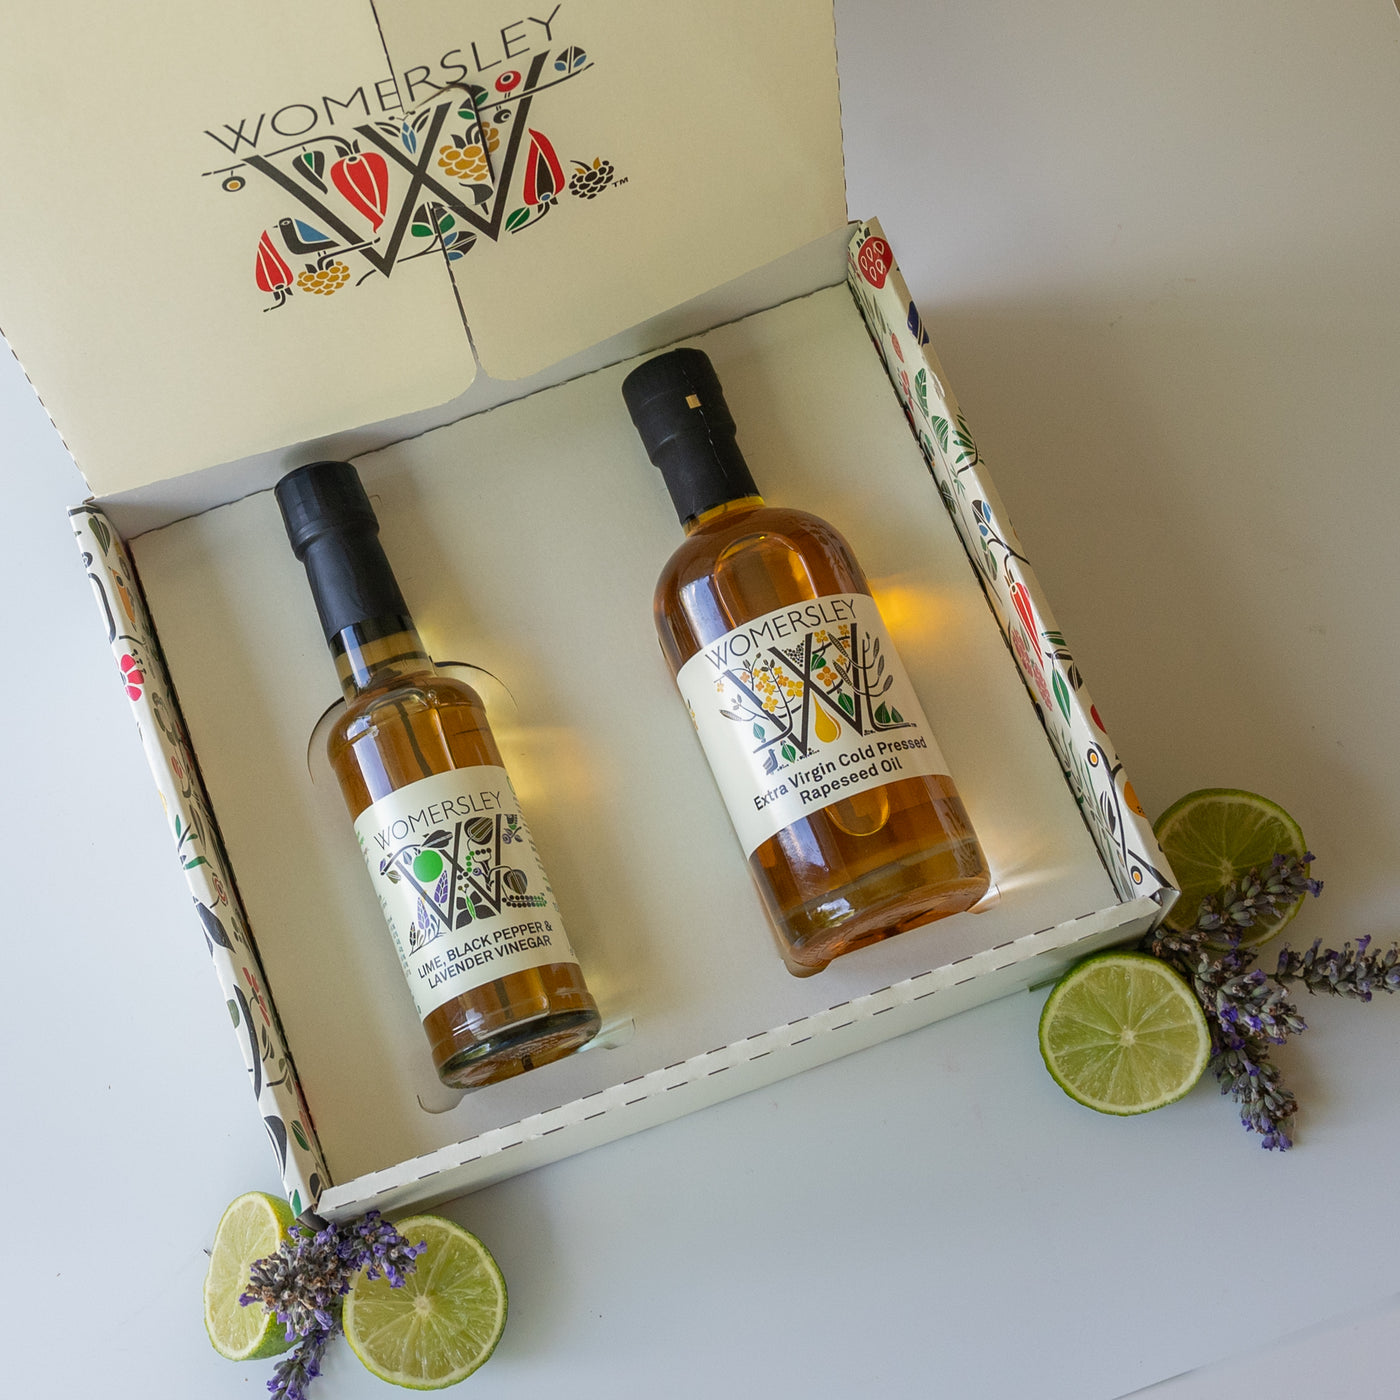 Womersley Foods Fruit & Herb vinegar opened Gift Box Divinely Luxurious Dressing with ingredients. Featuring lime, black pepper and lavender fruit vinegar and extra virgin cold pressed rapeseed oil with image of cut lime and lavender on a grey background.